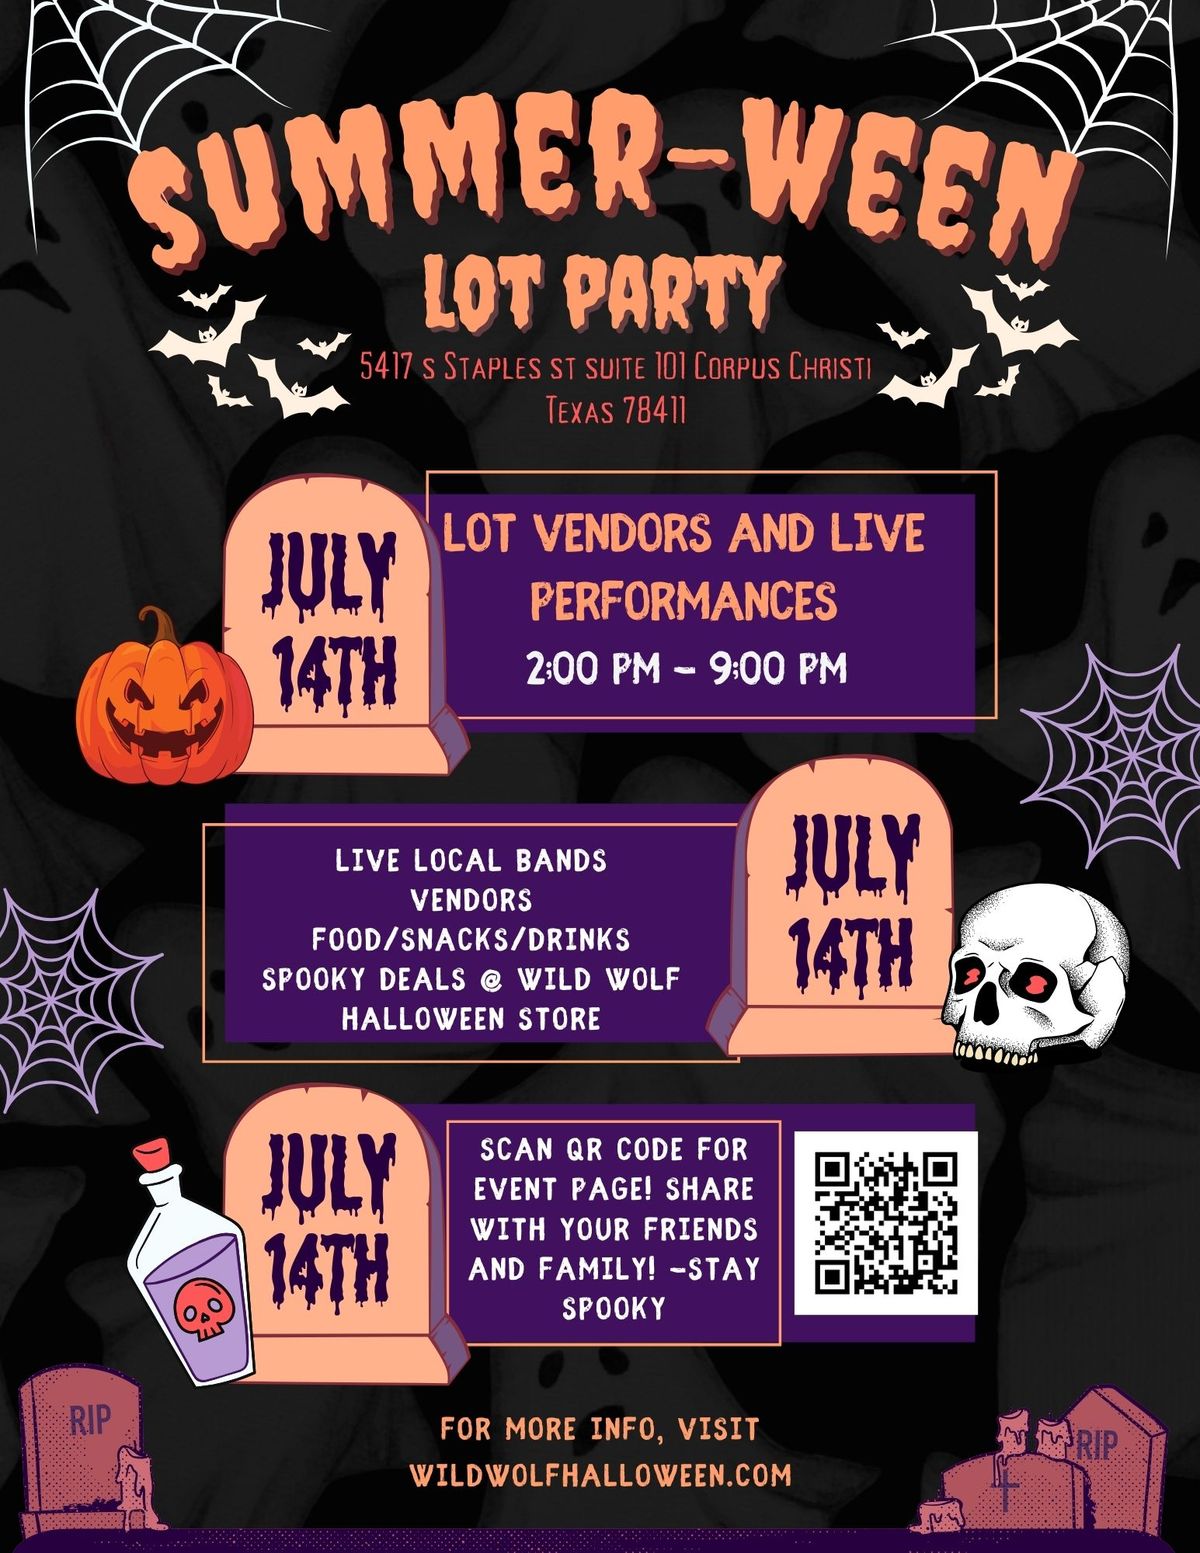 Summer-Ween Lot Party